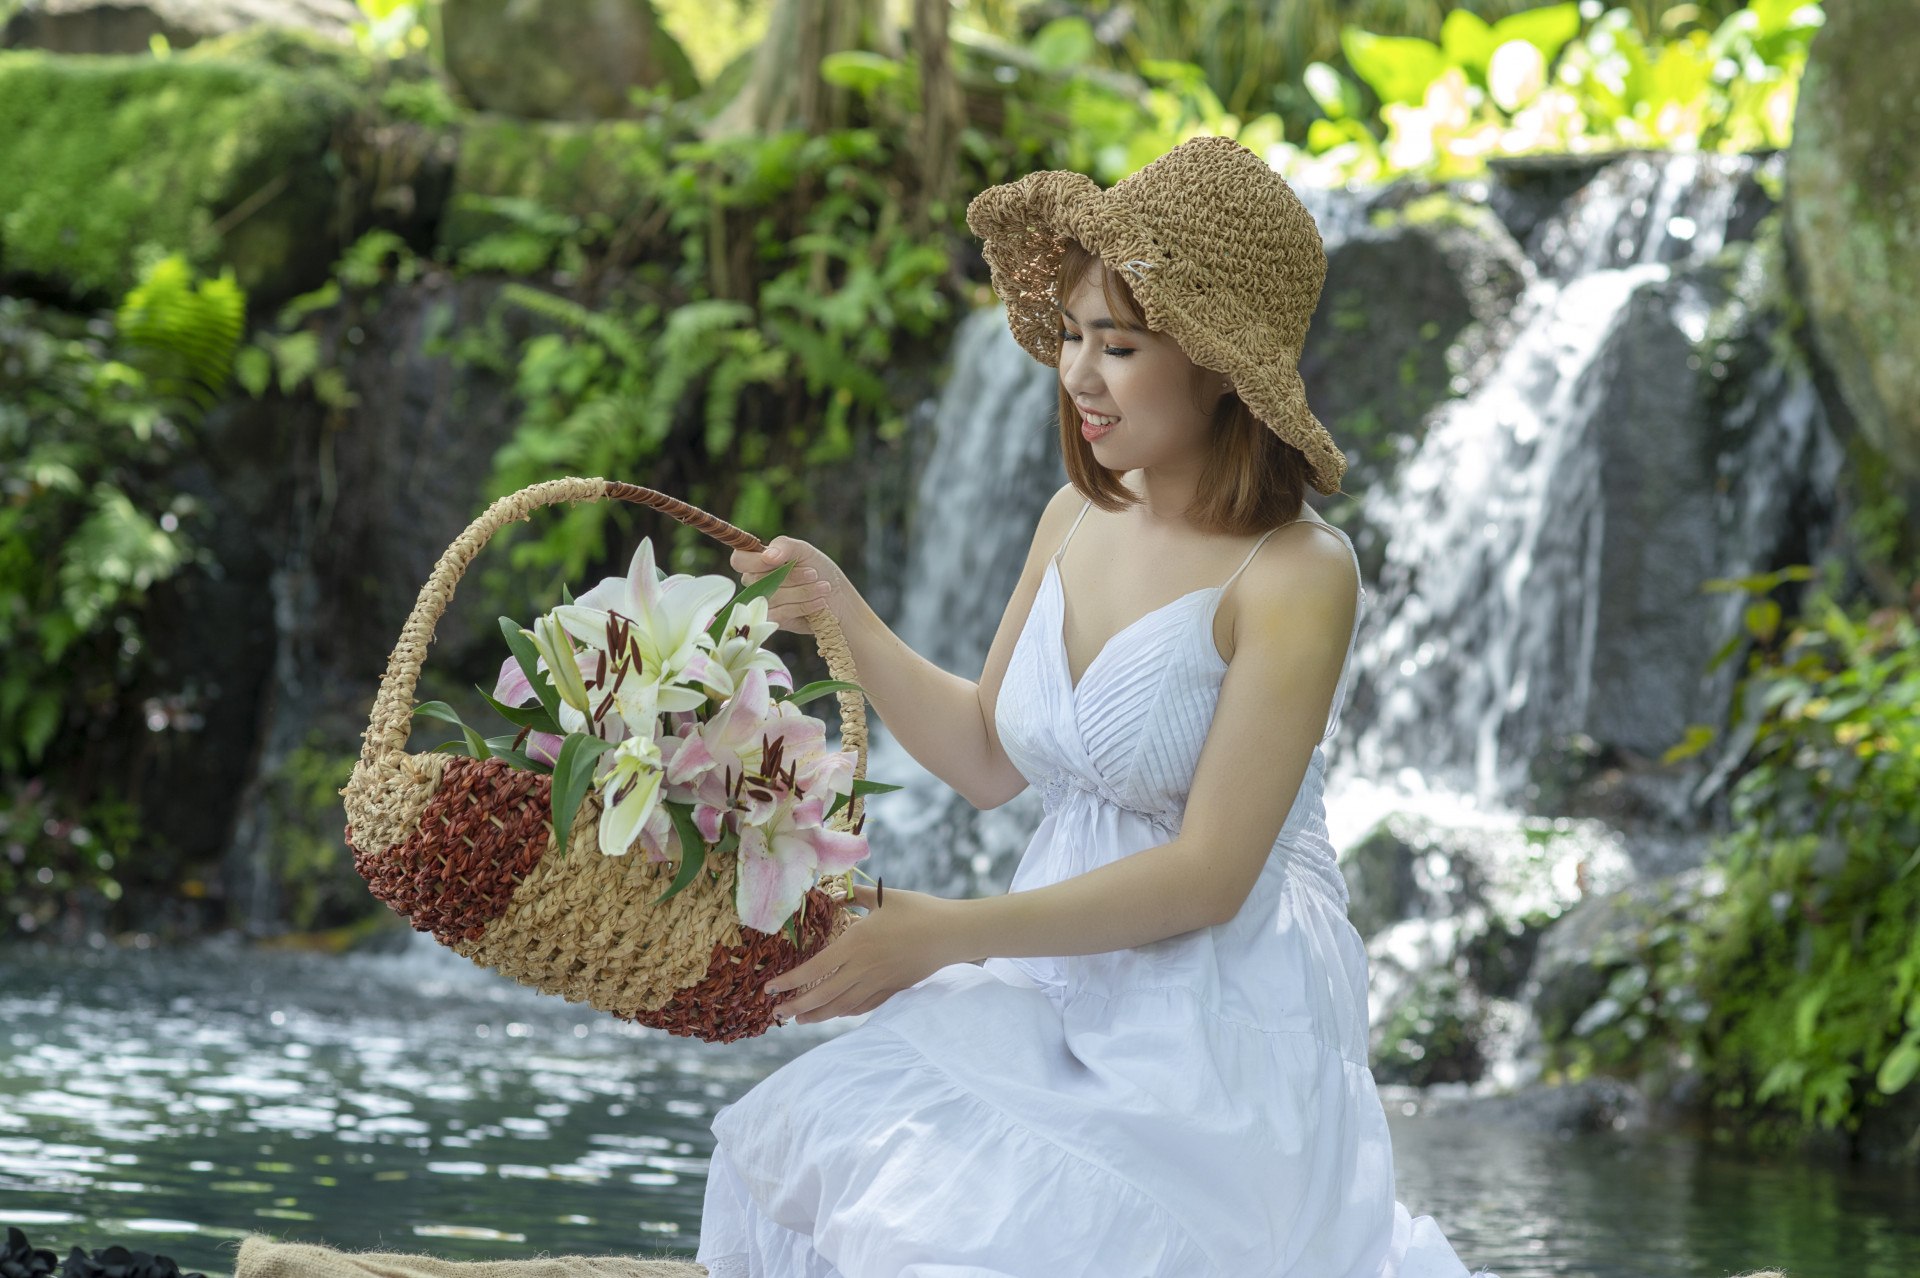 Dating Vietnamese - Dating Advice and Encouragement